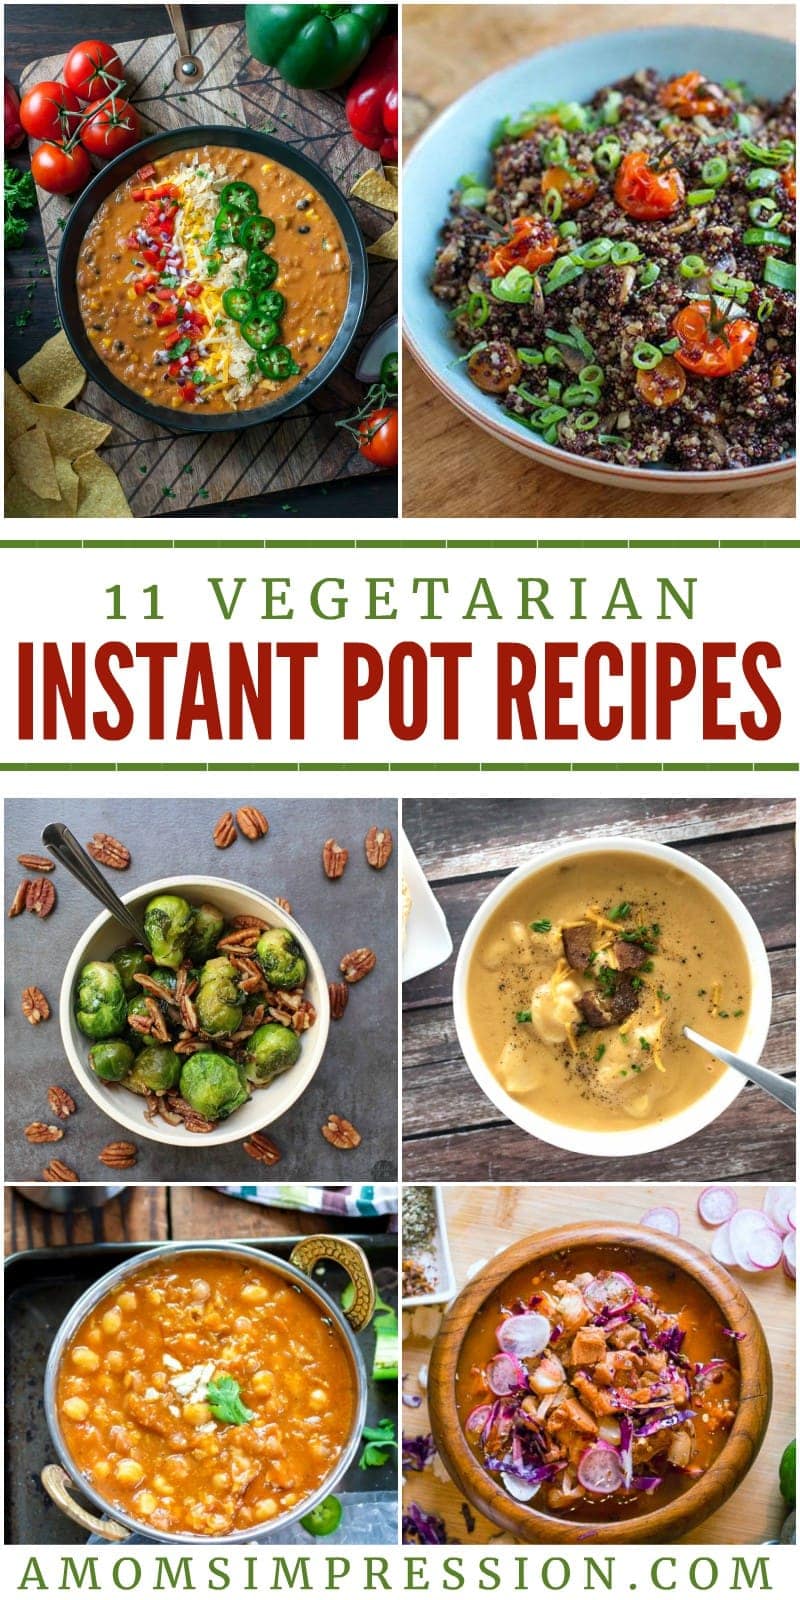 11 Exciting Vegetarian Instant Pot Recipes Everyone will Love